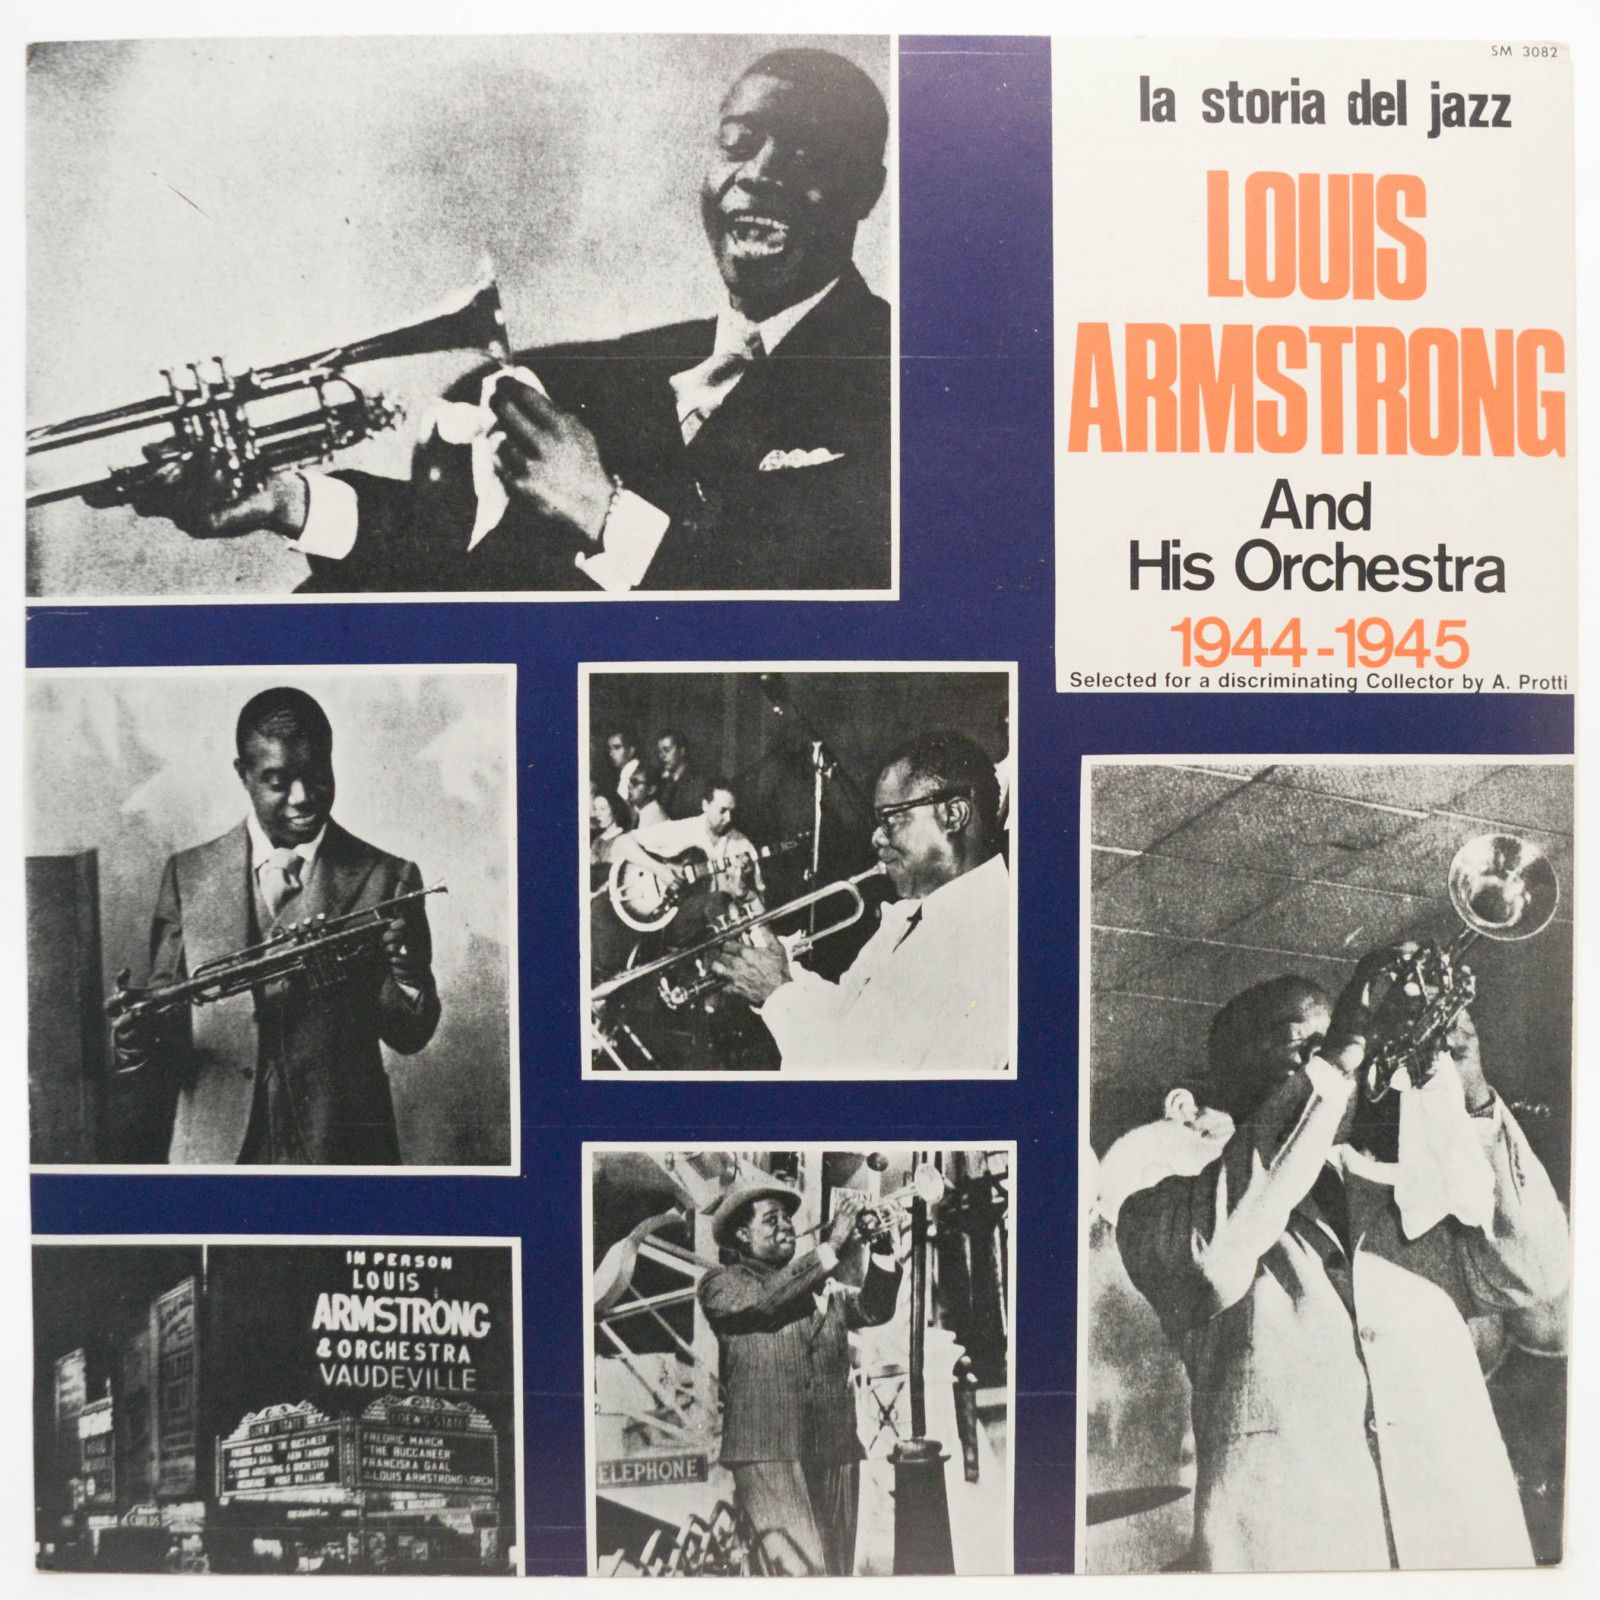 Louis Armstrong And His Orchestra — 1944 - 1945, 1971